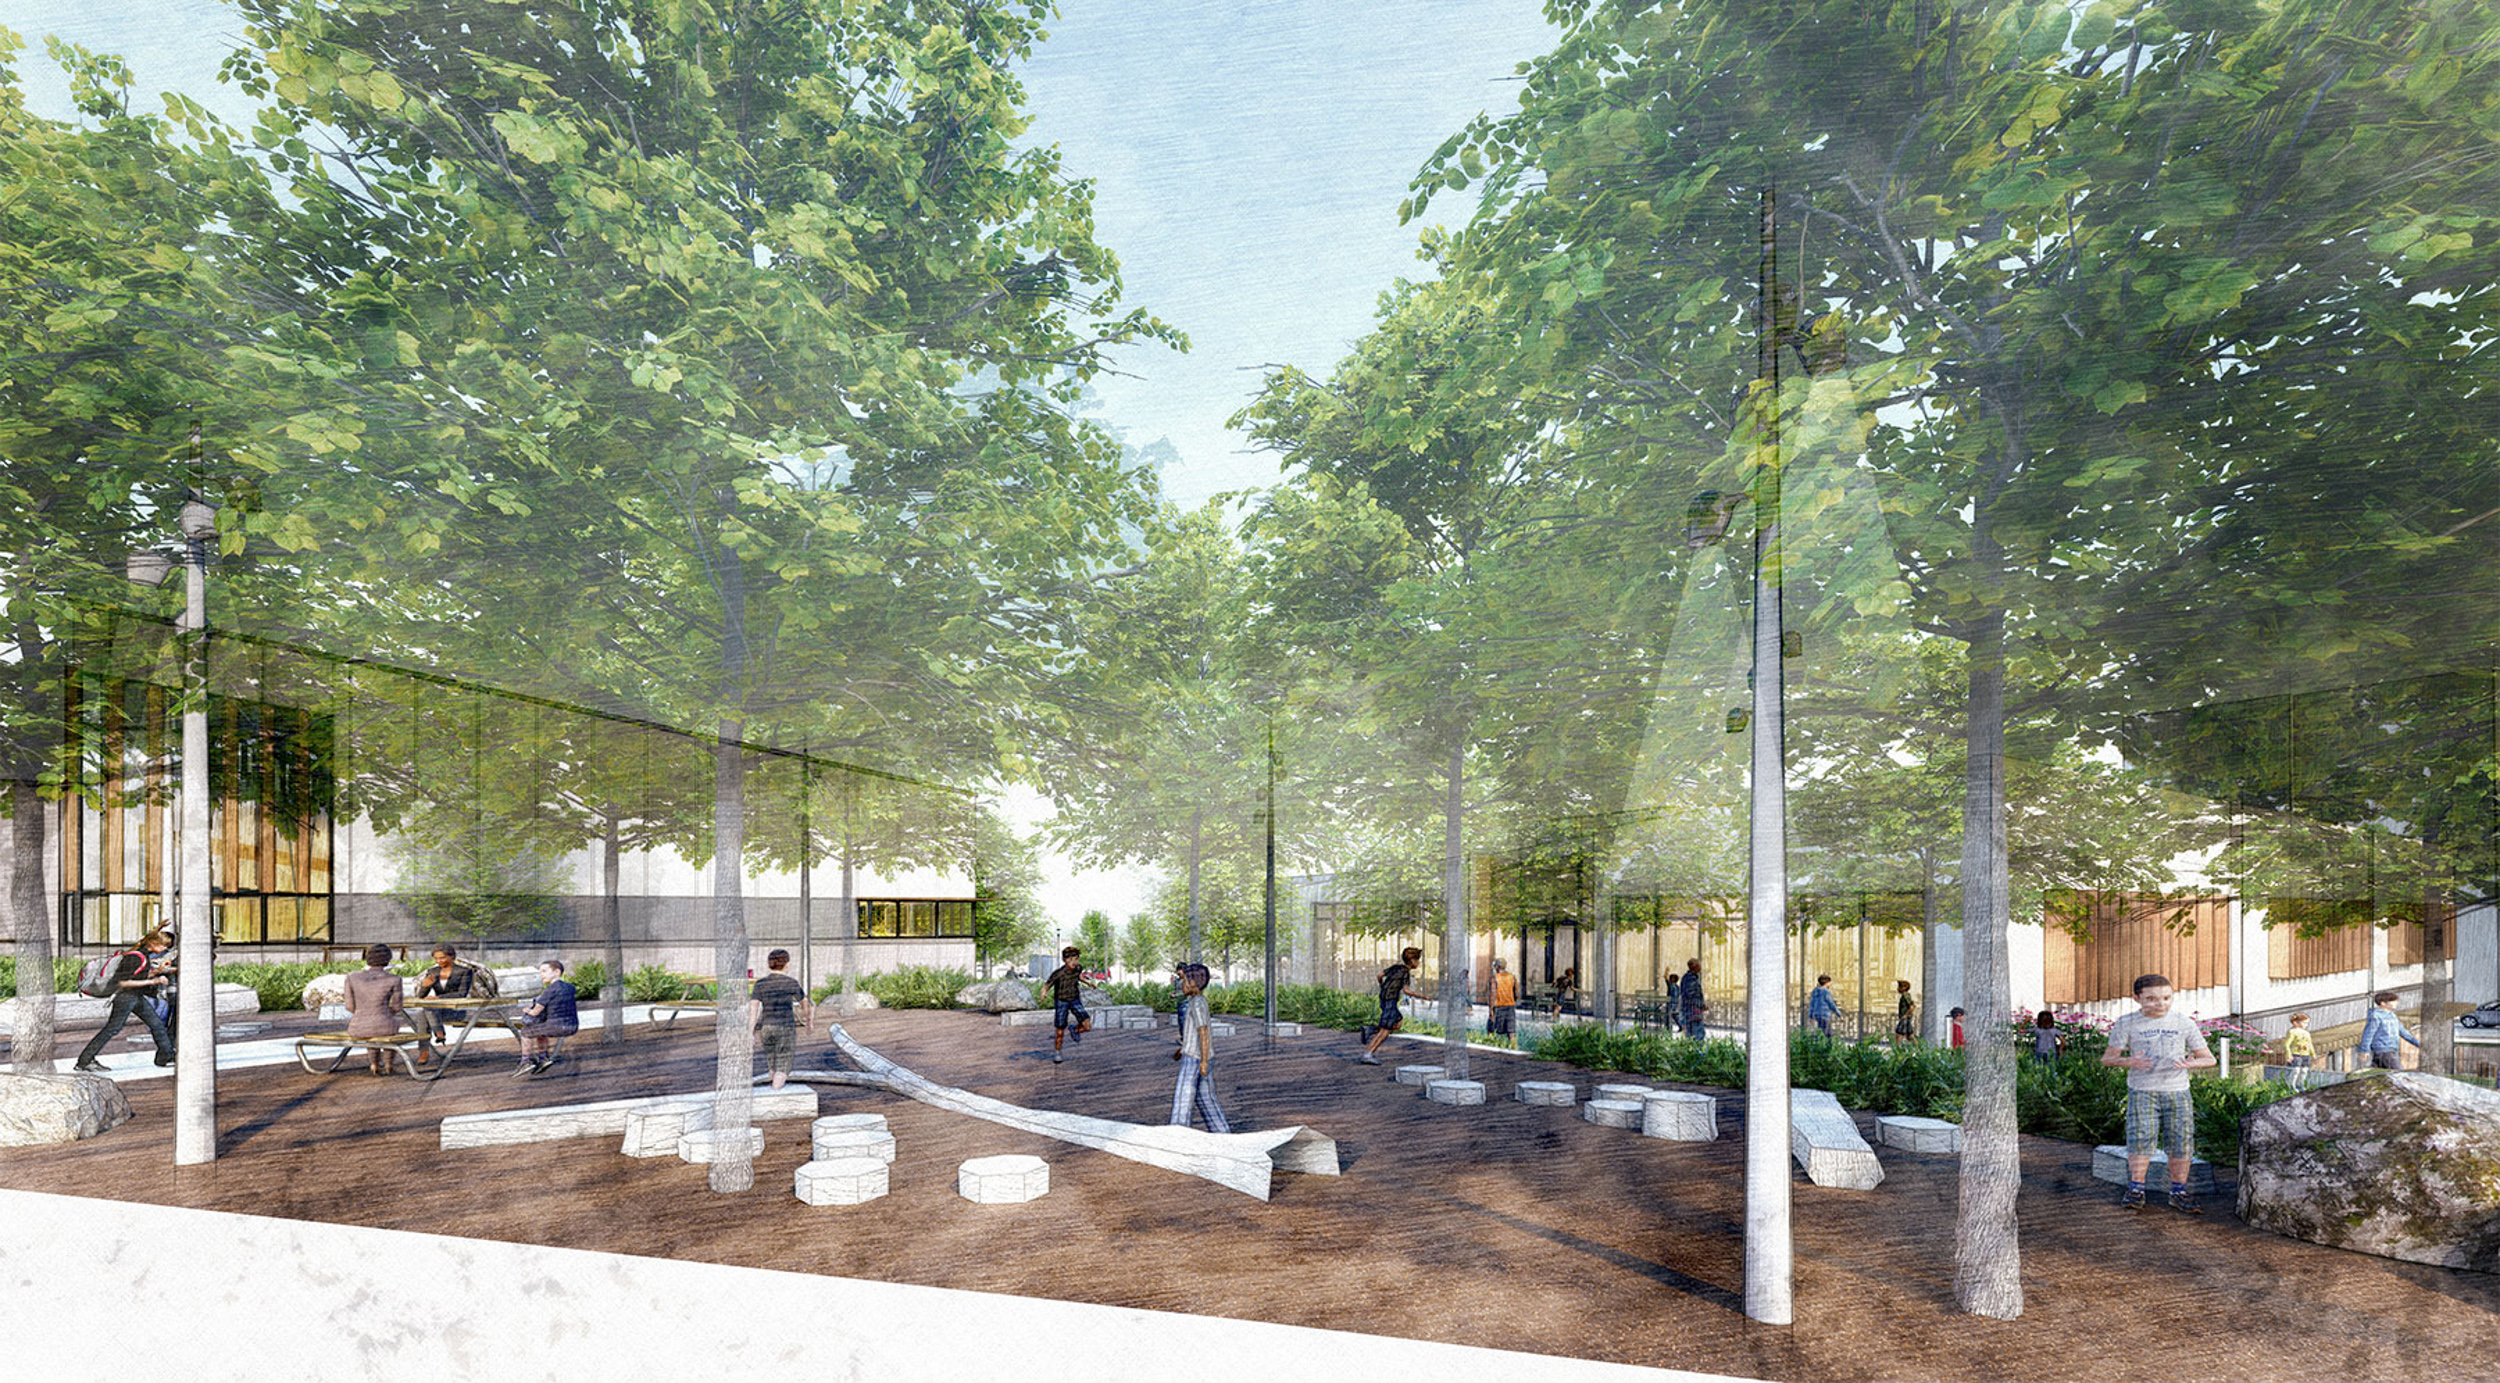 Sunnydale Community Center amenity space, rendering by LMS Architects